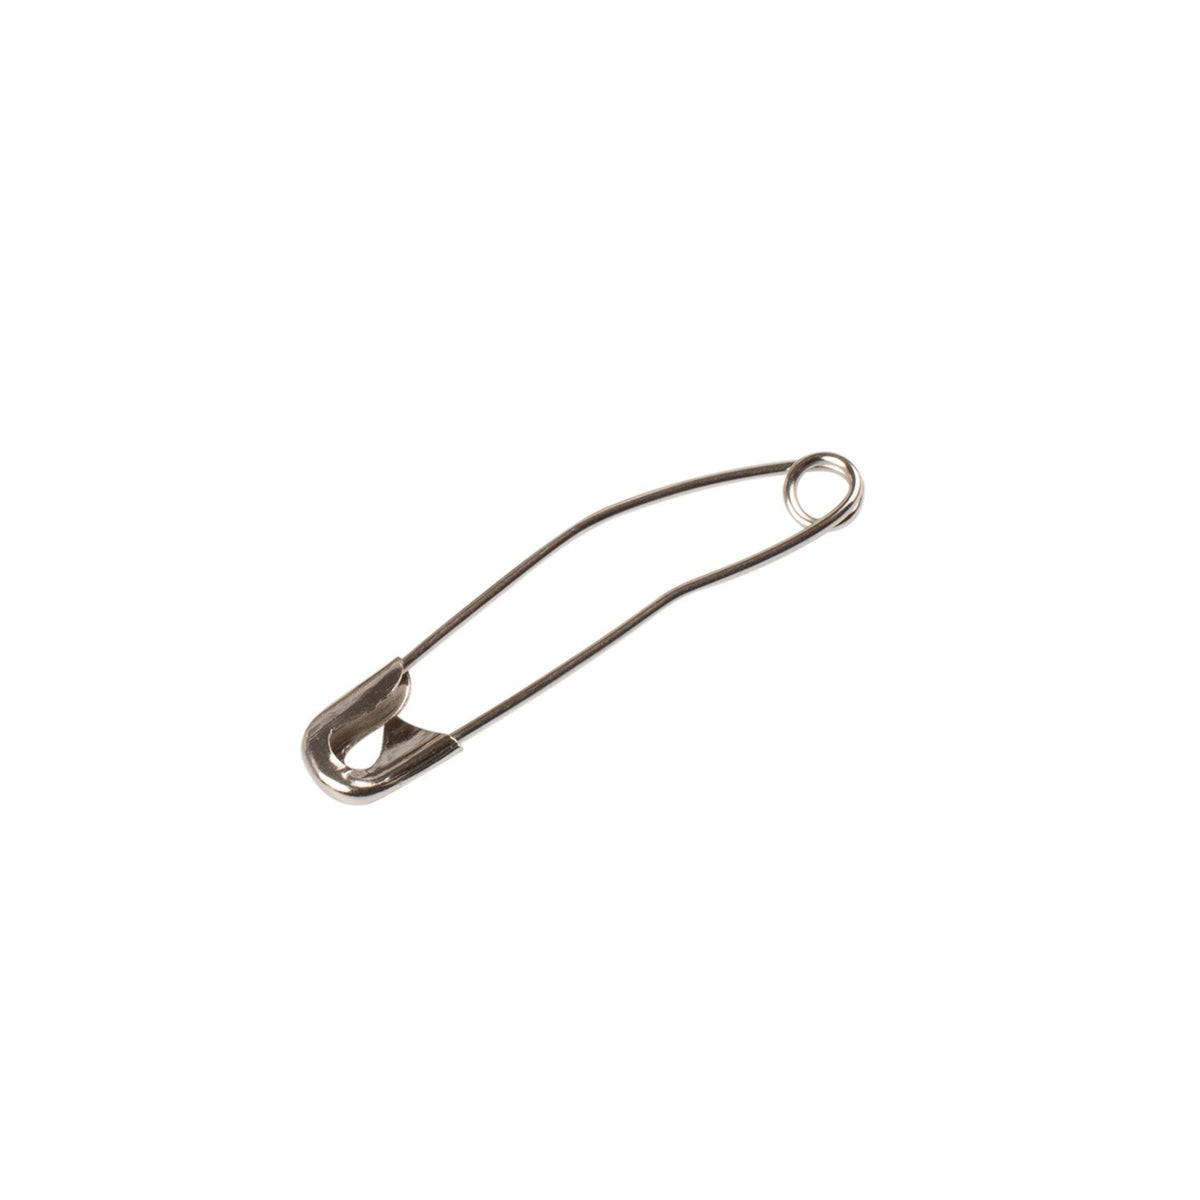 Bohin Curved Safety Pins 1 1/2 - 65 Count – The Singer